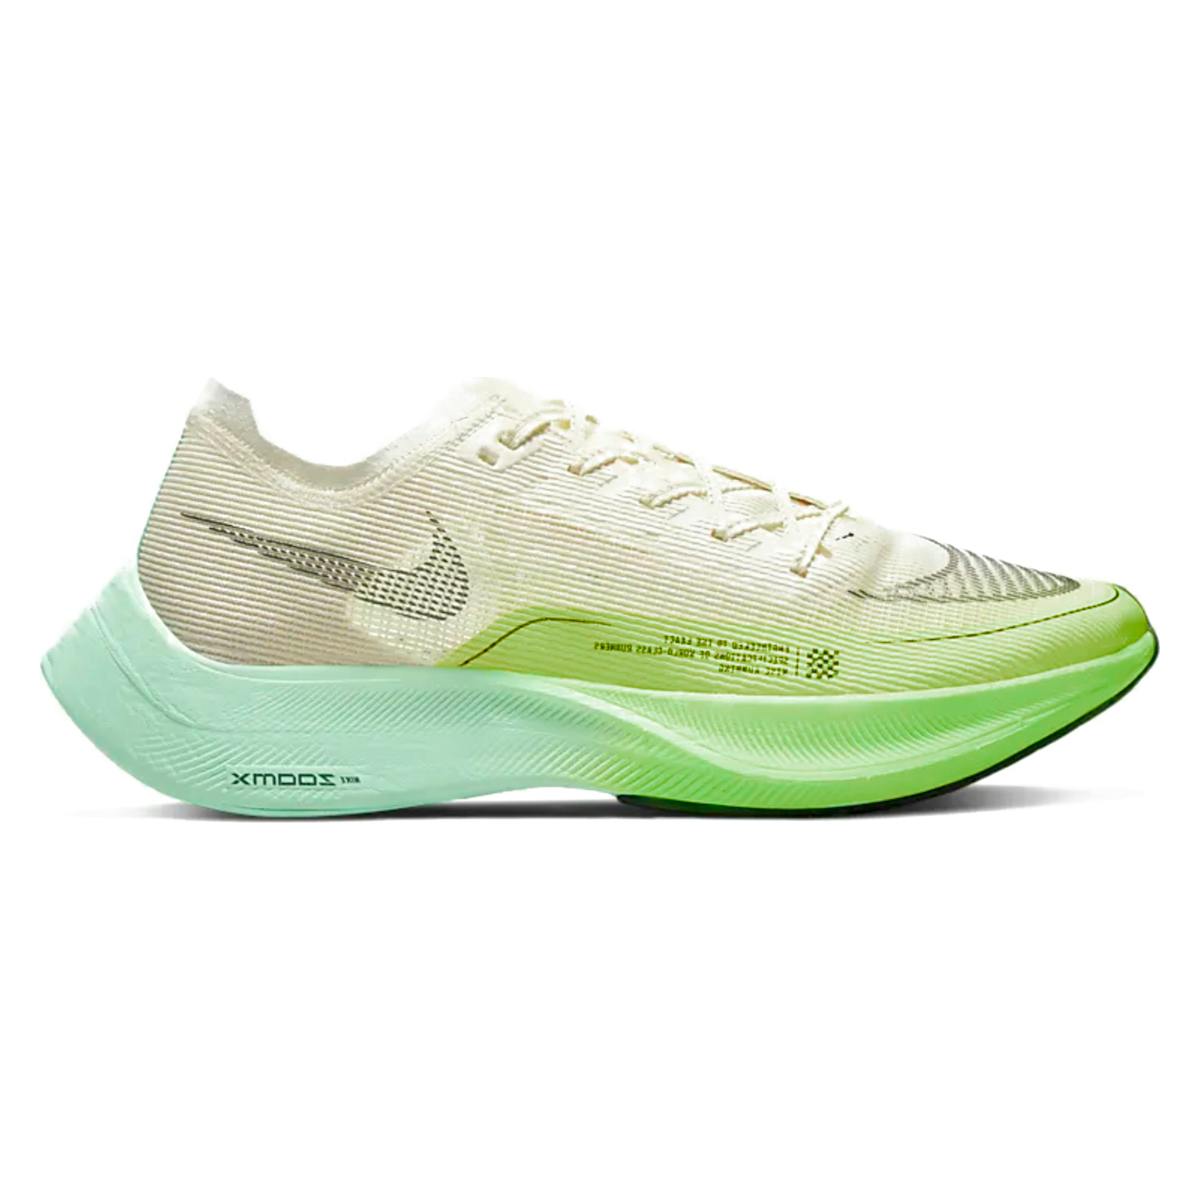 Nike ZoomX Vaporfly Next% 2 Coconut Milk Ghost Green